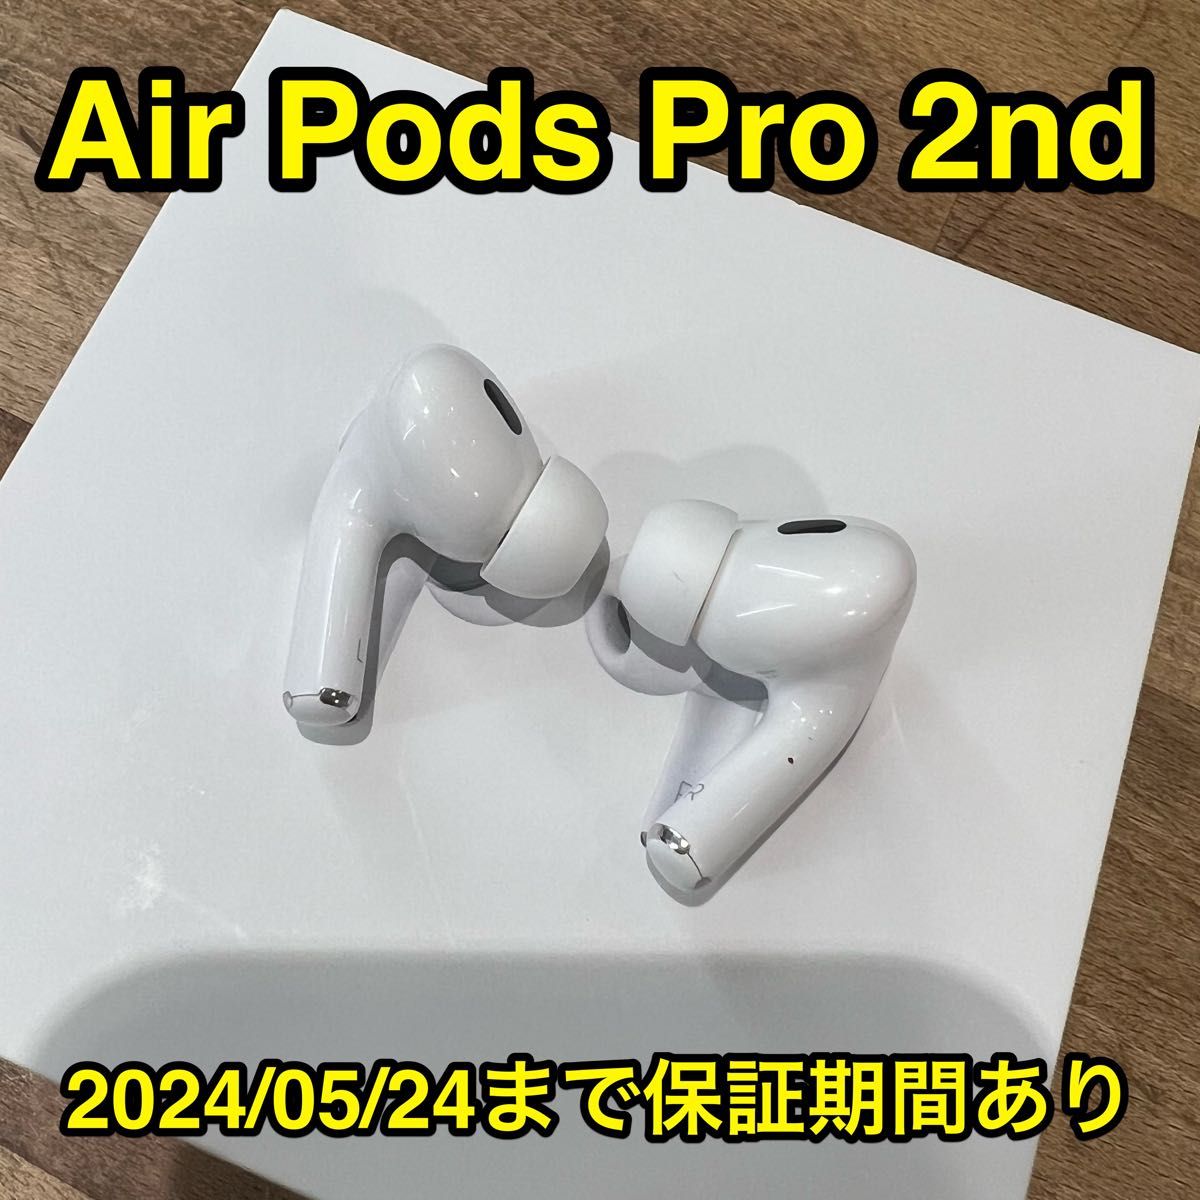 AirPods Pro 2世代　（保証期間2024/5/23まで!!）即発送できます！